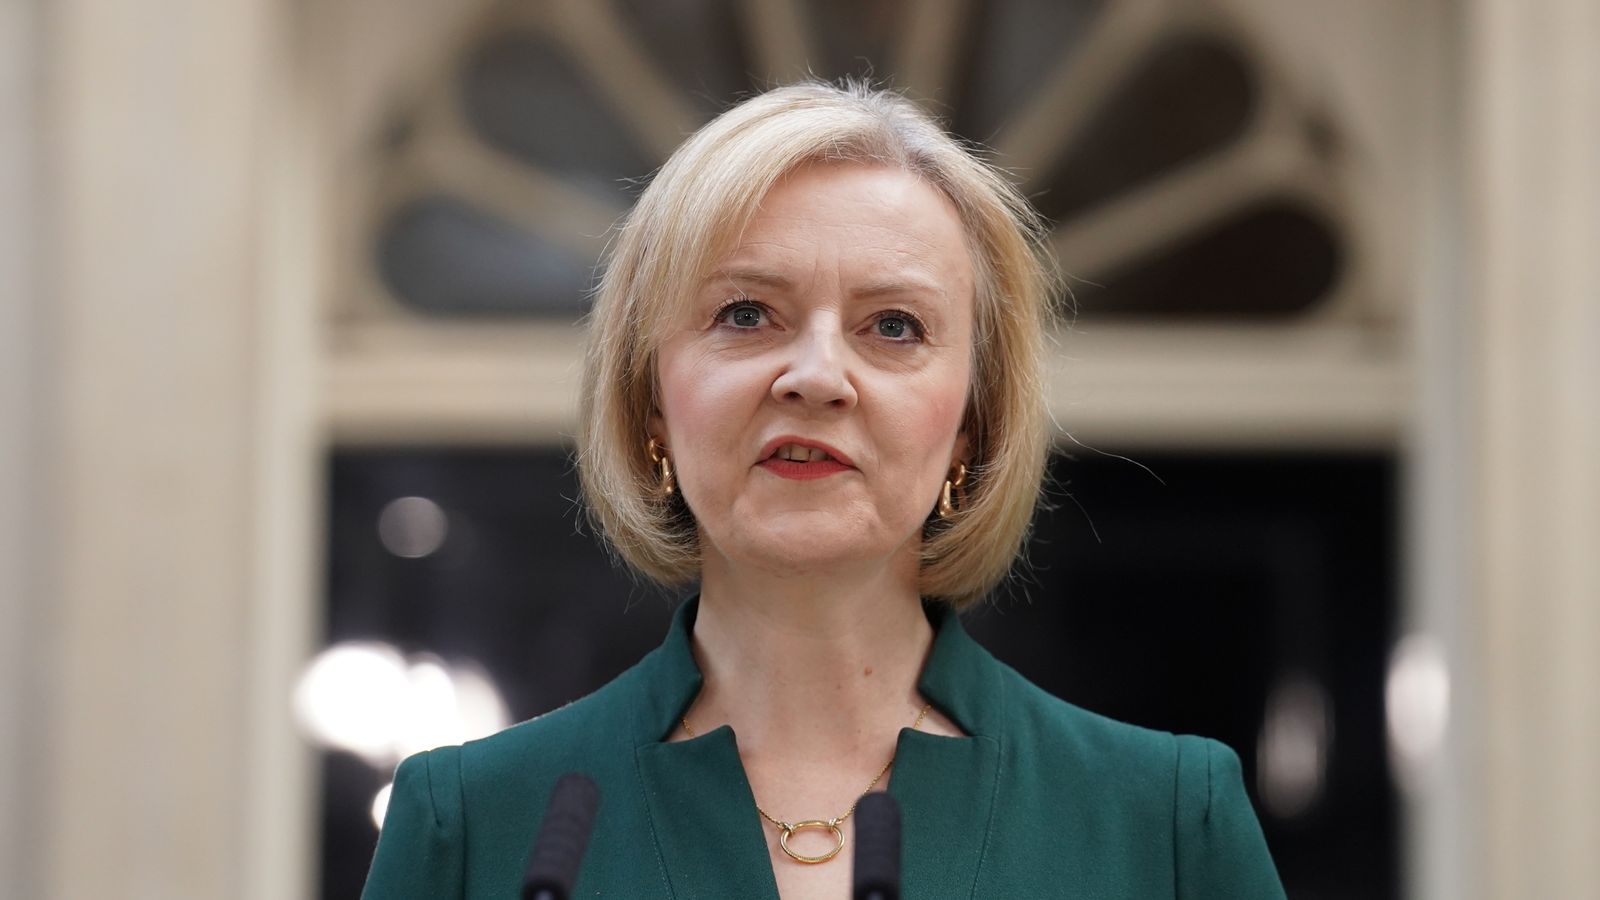 Calls for an urgent investigation after reports Liz Truss's phone was hacked